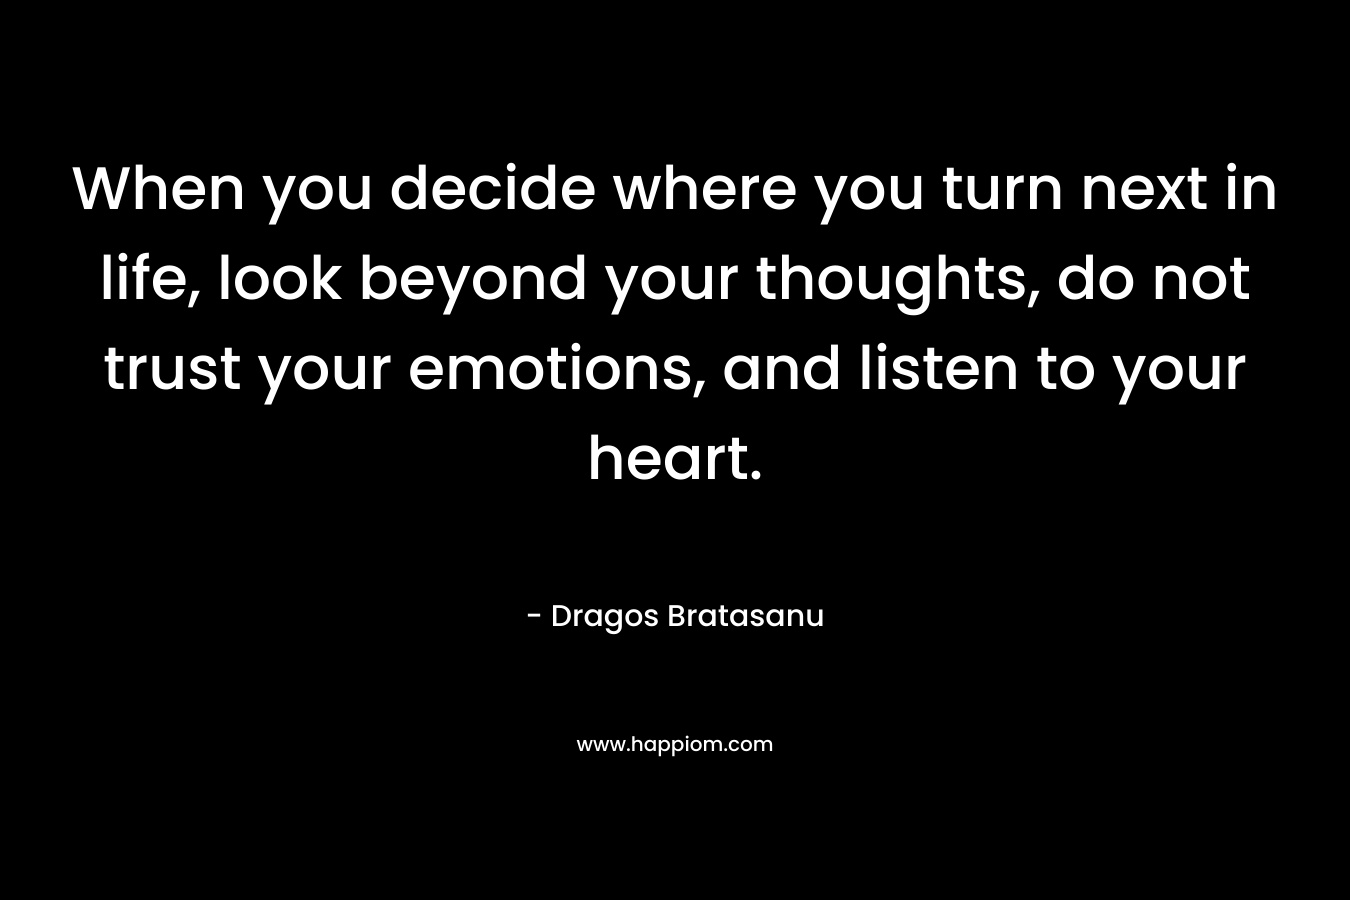 When you decide where you turn next in life, look beyond your thoughts, do not trust your emotions, and listen to your heart. – Dragos Bratasanu